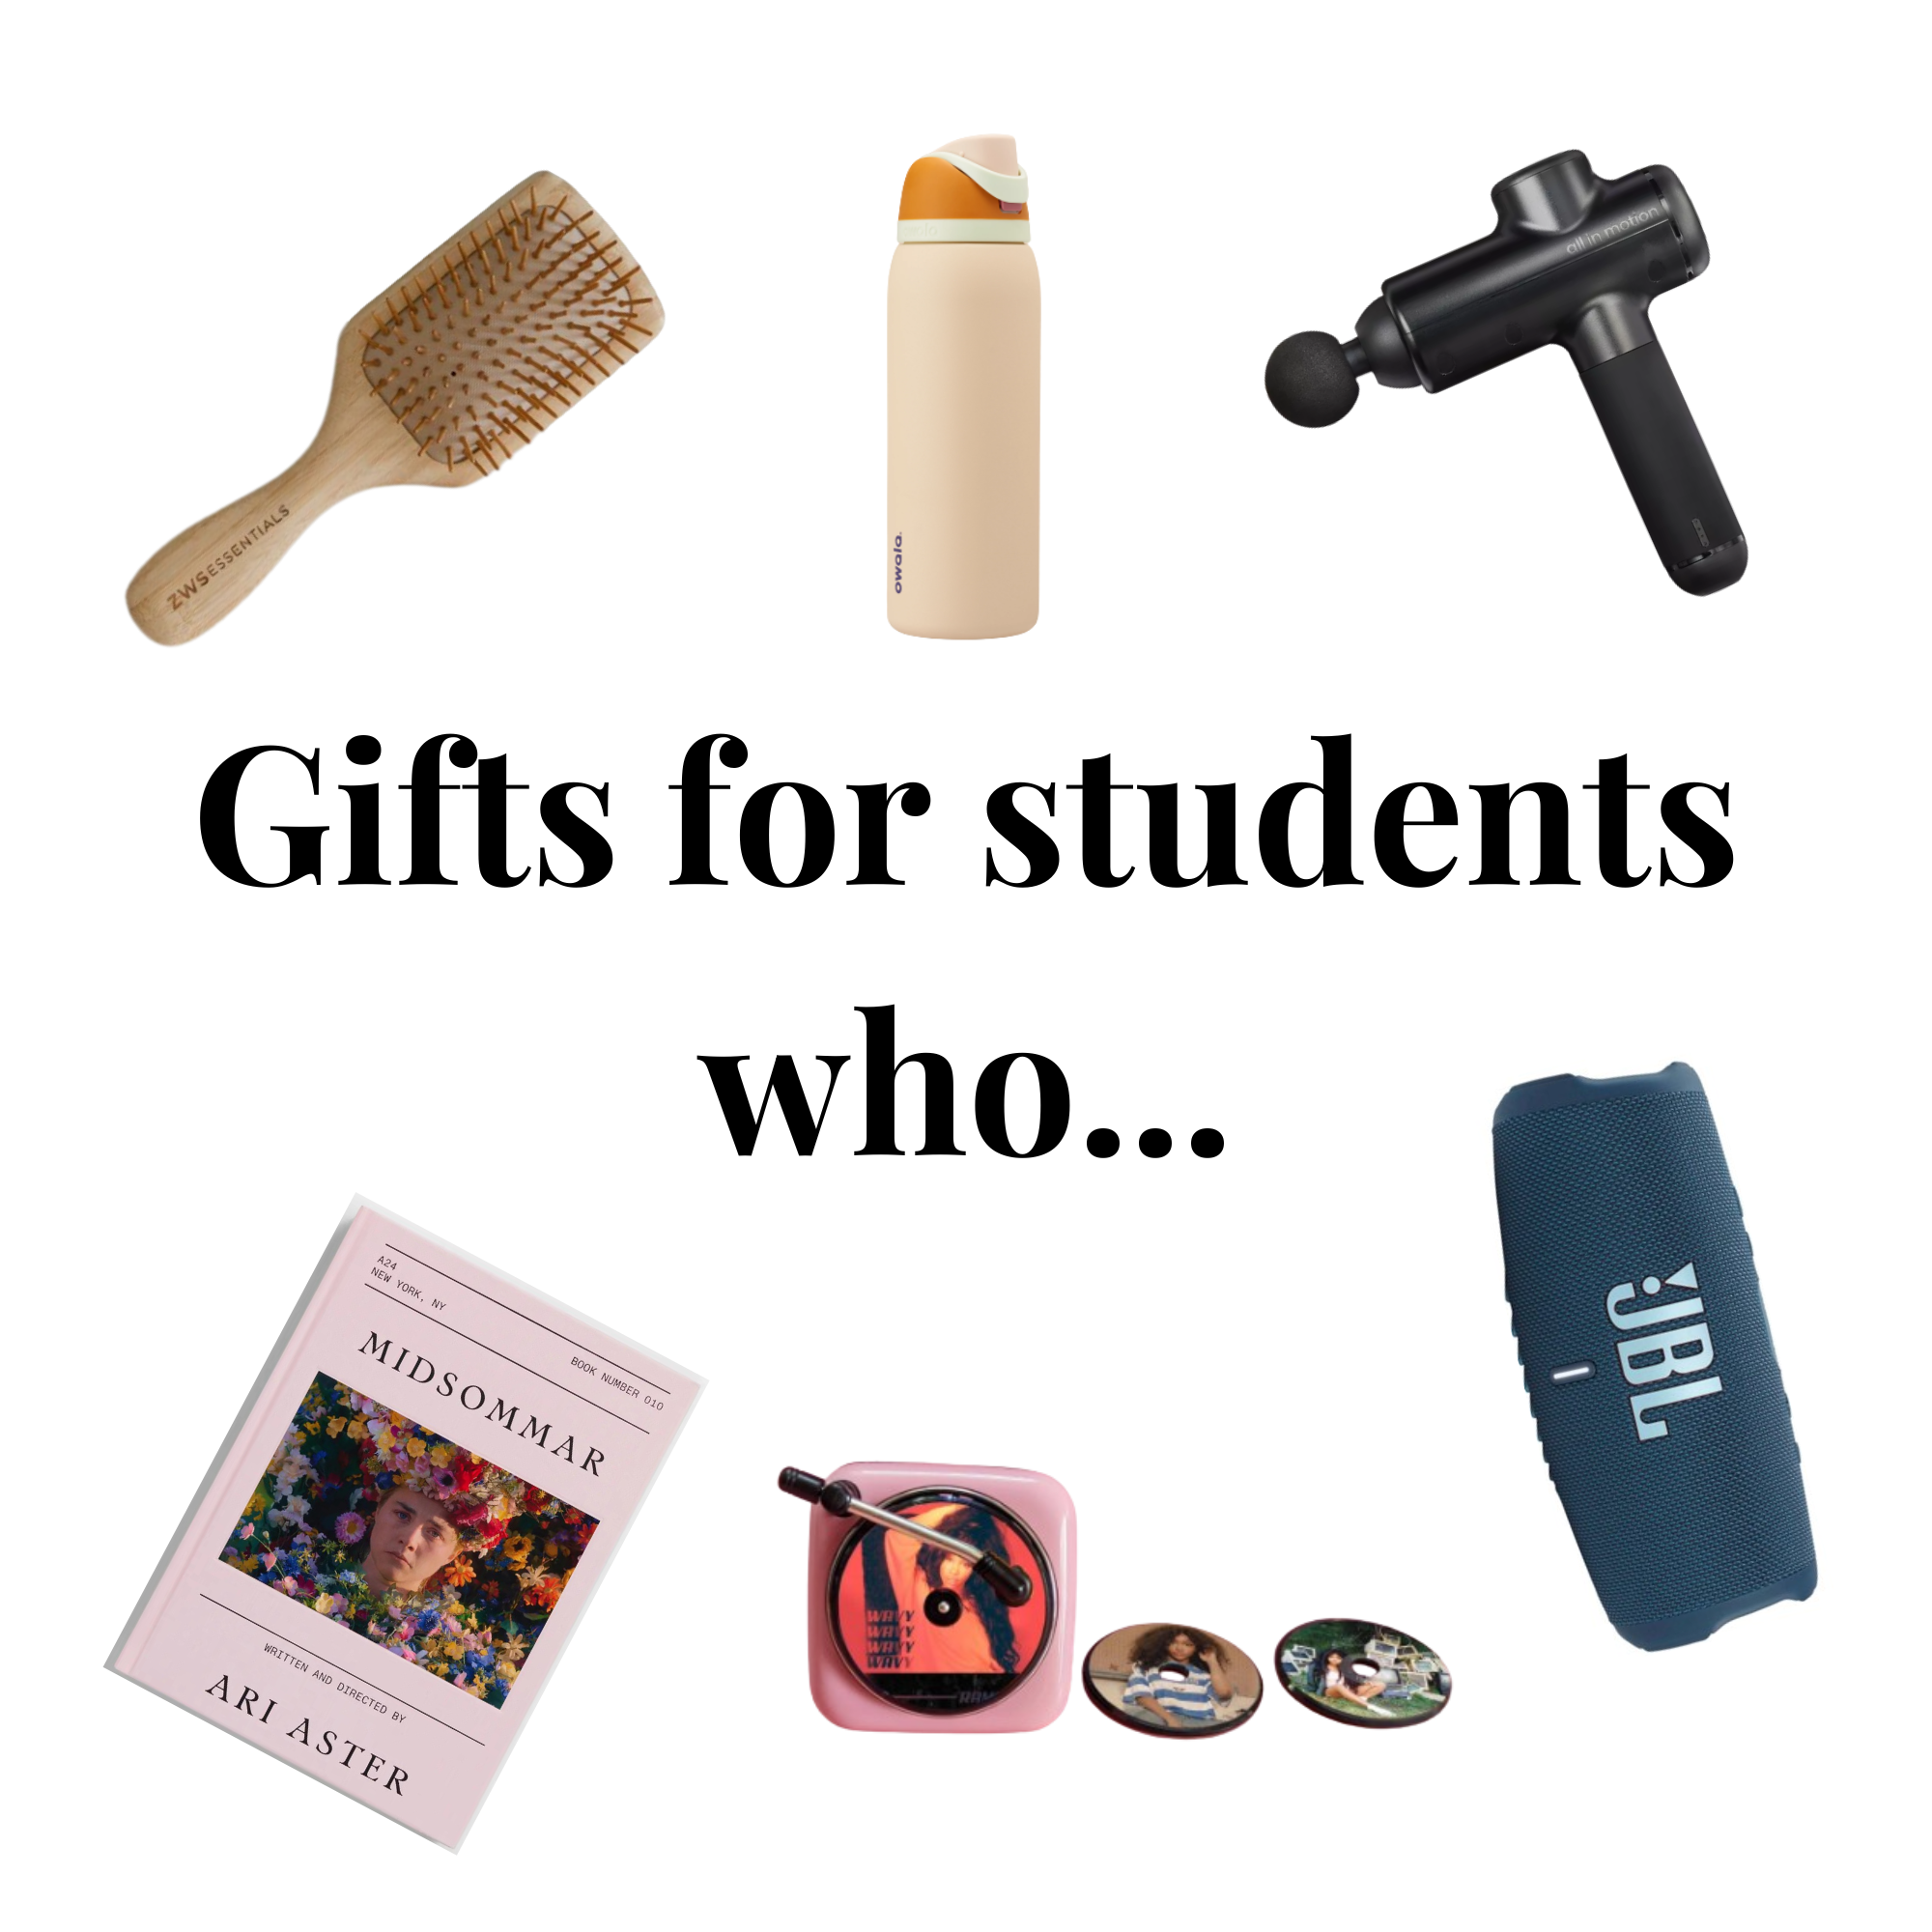 Gifts for Students Who...